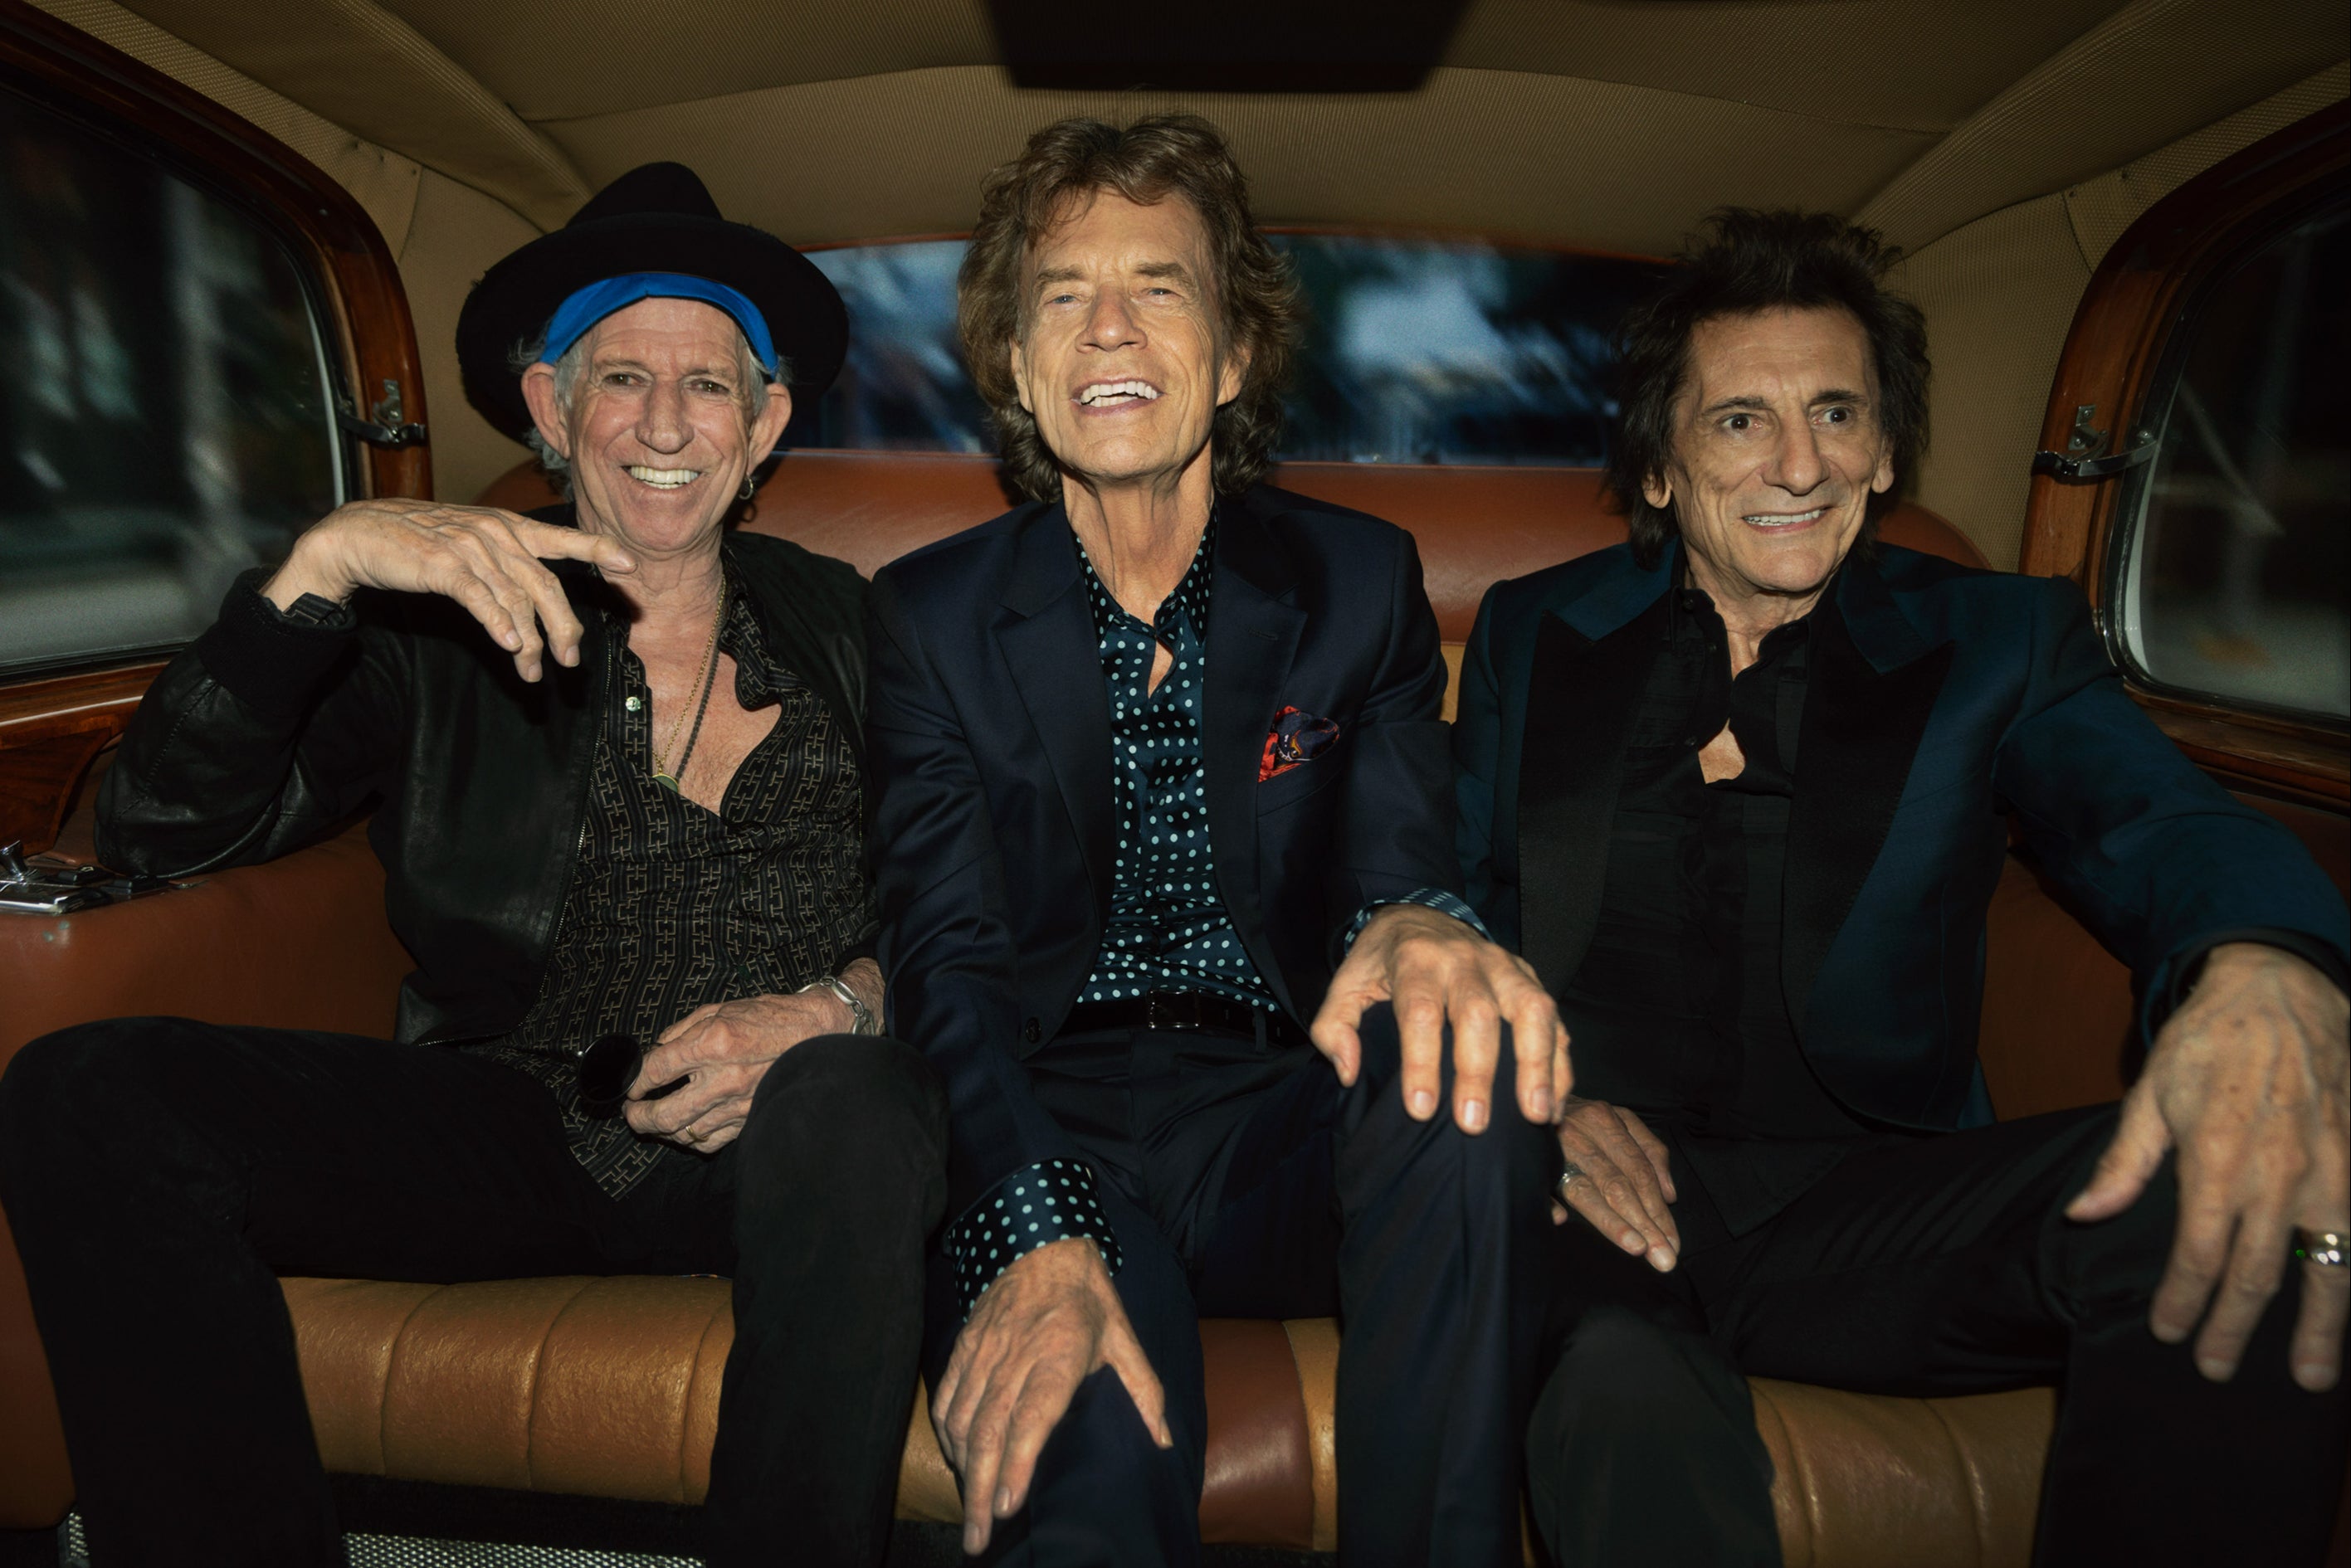 The Rolling Stones return on 20 October with their 24th studio album